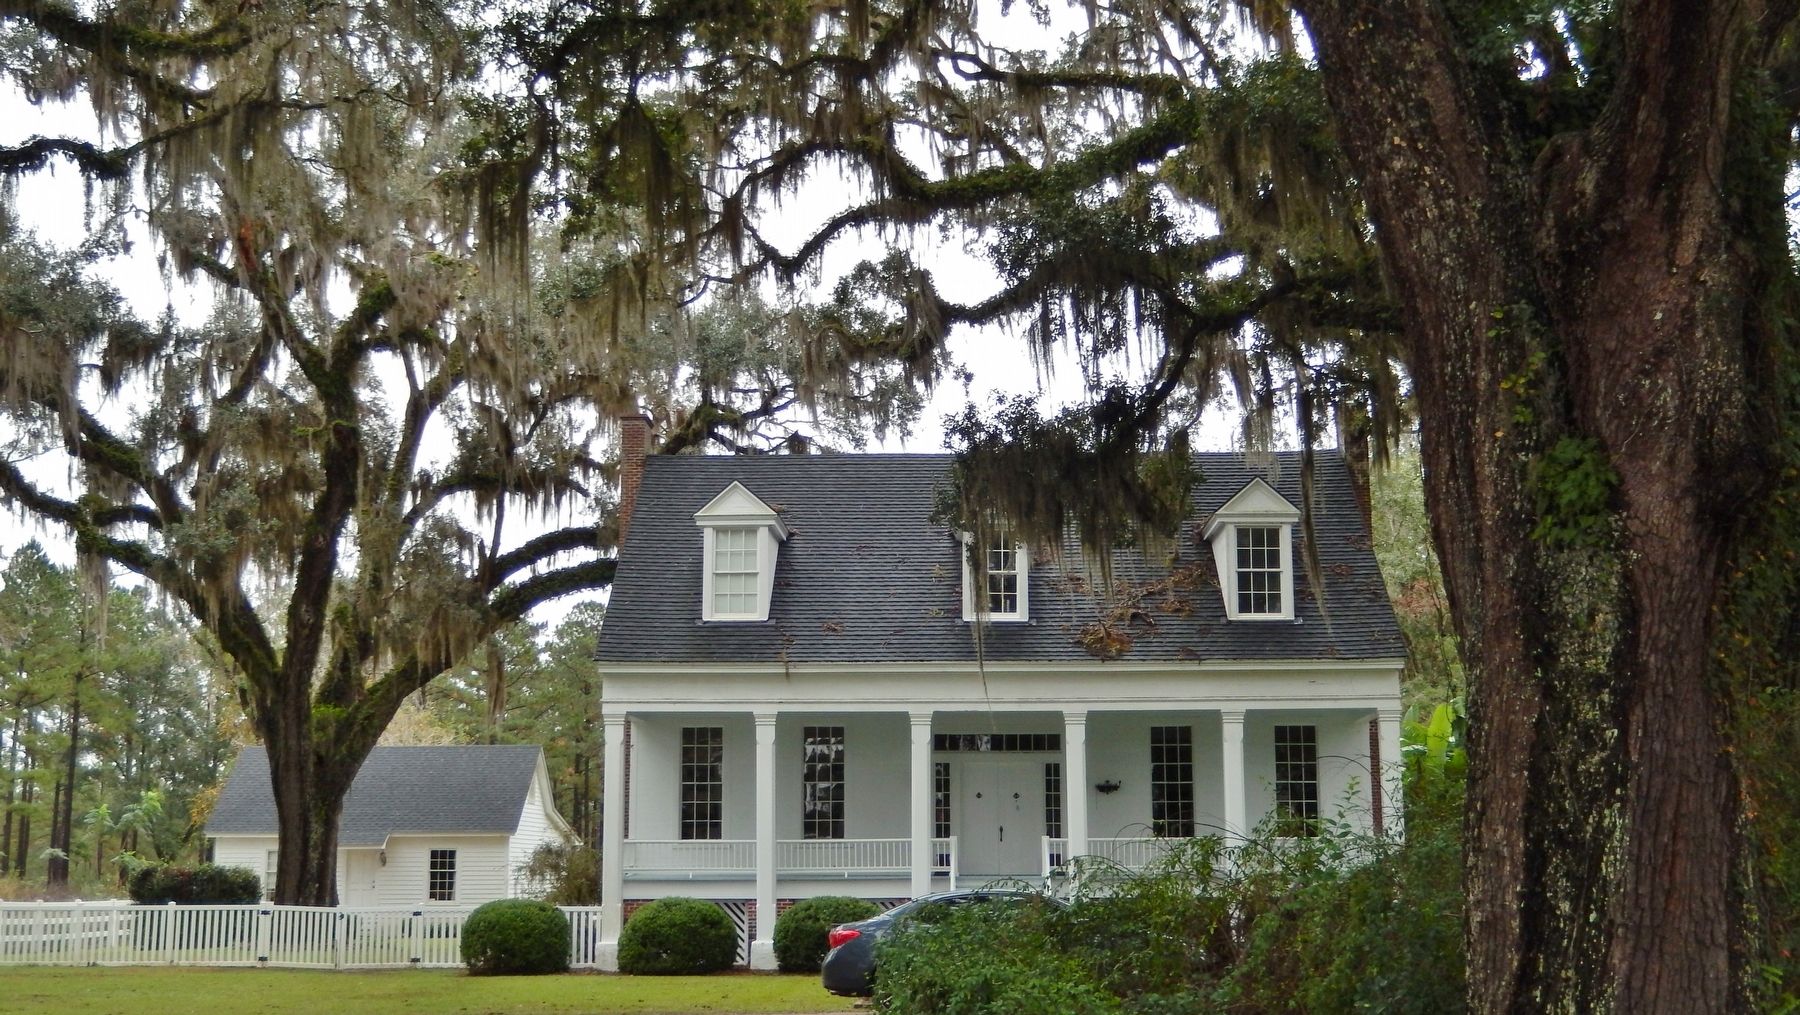 Asa May House/Rosewood Plantation (<i>wide view from U.S. Highway 19</i>) image. Click for full size.